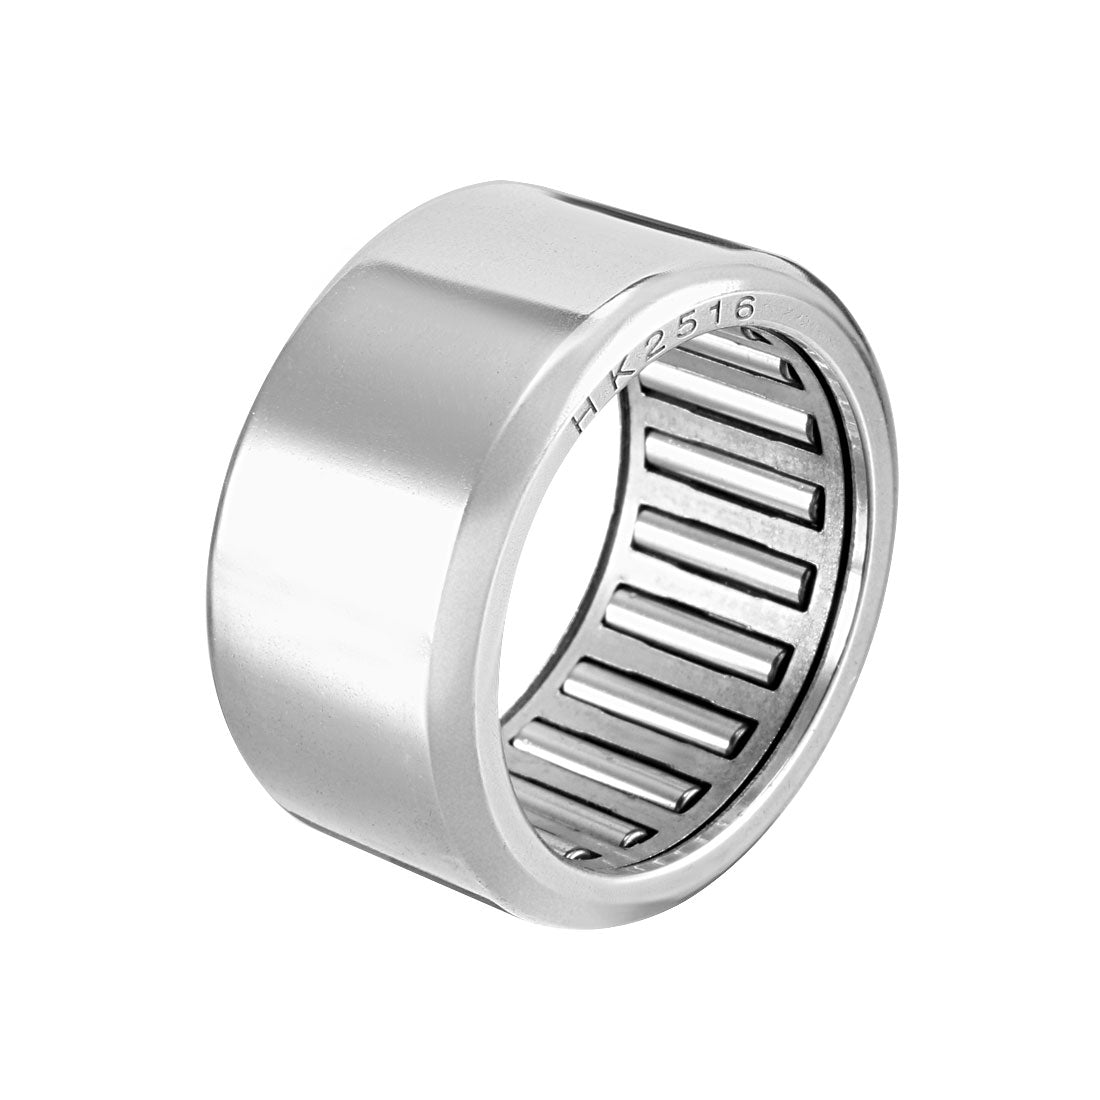 uxcell Uxcell HK Series Needle Roller Bearings, Open End, Stamping Steel Drawn Cup, Metric